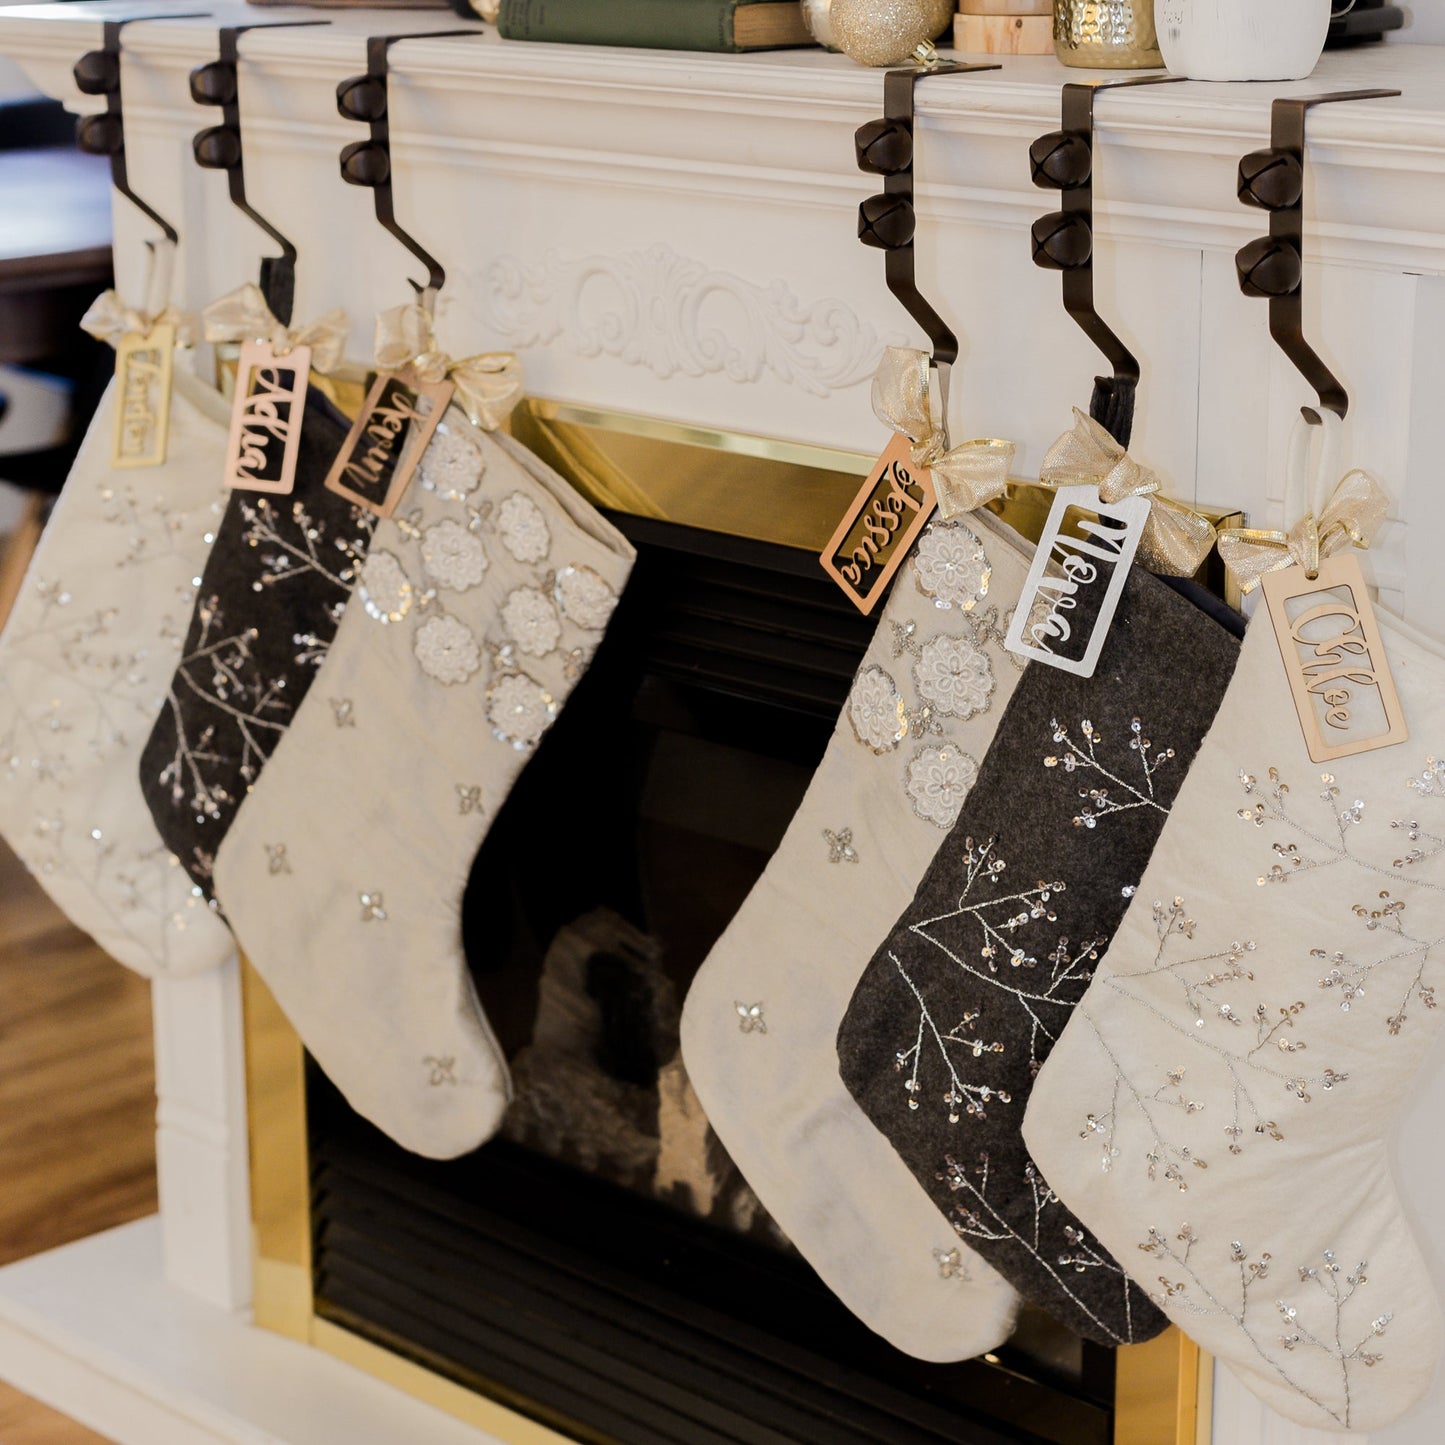 Personalized Wooden Stocking Tags, Script Font - Laser Cut Wood hanging on stockings on fireplace mantel - by LeeMo Designs in Bend, Oregon